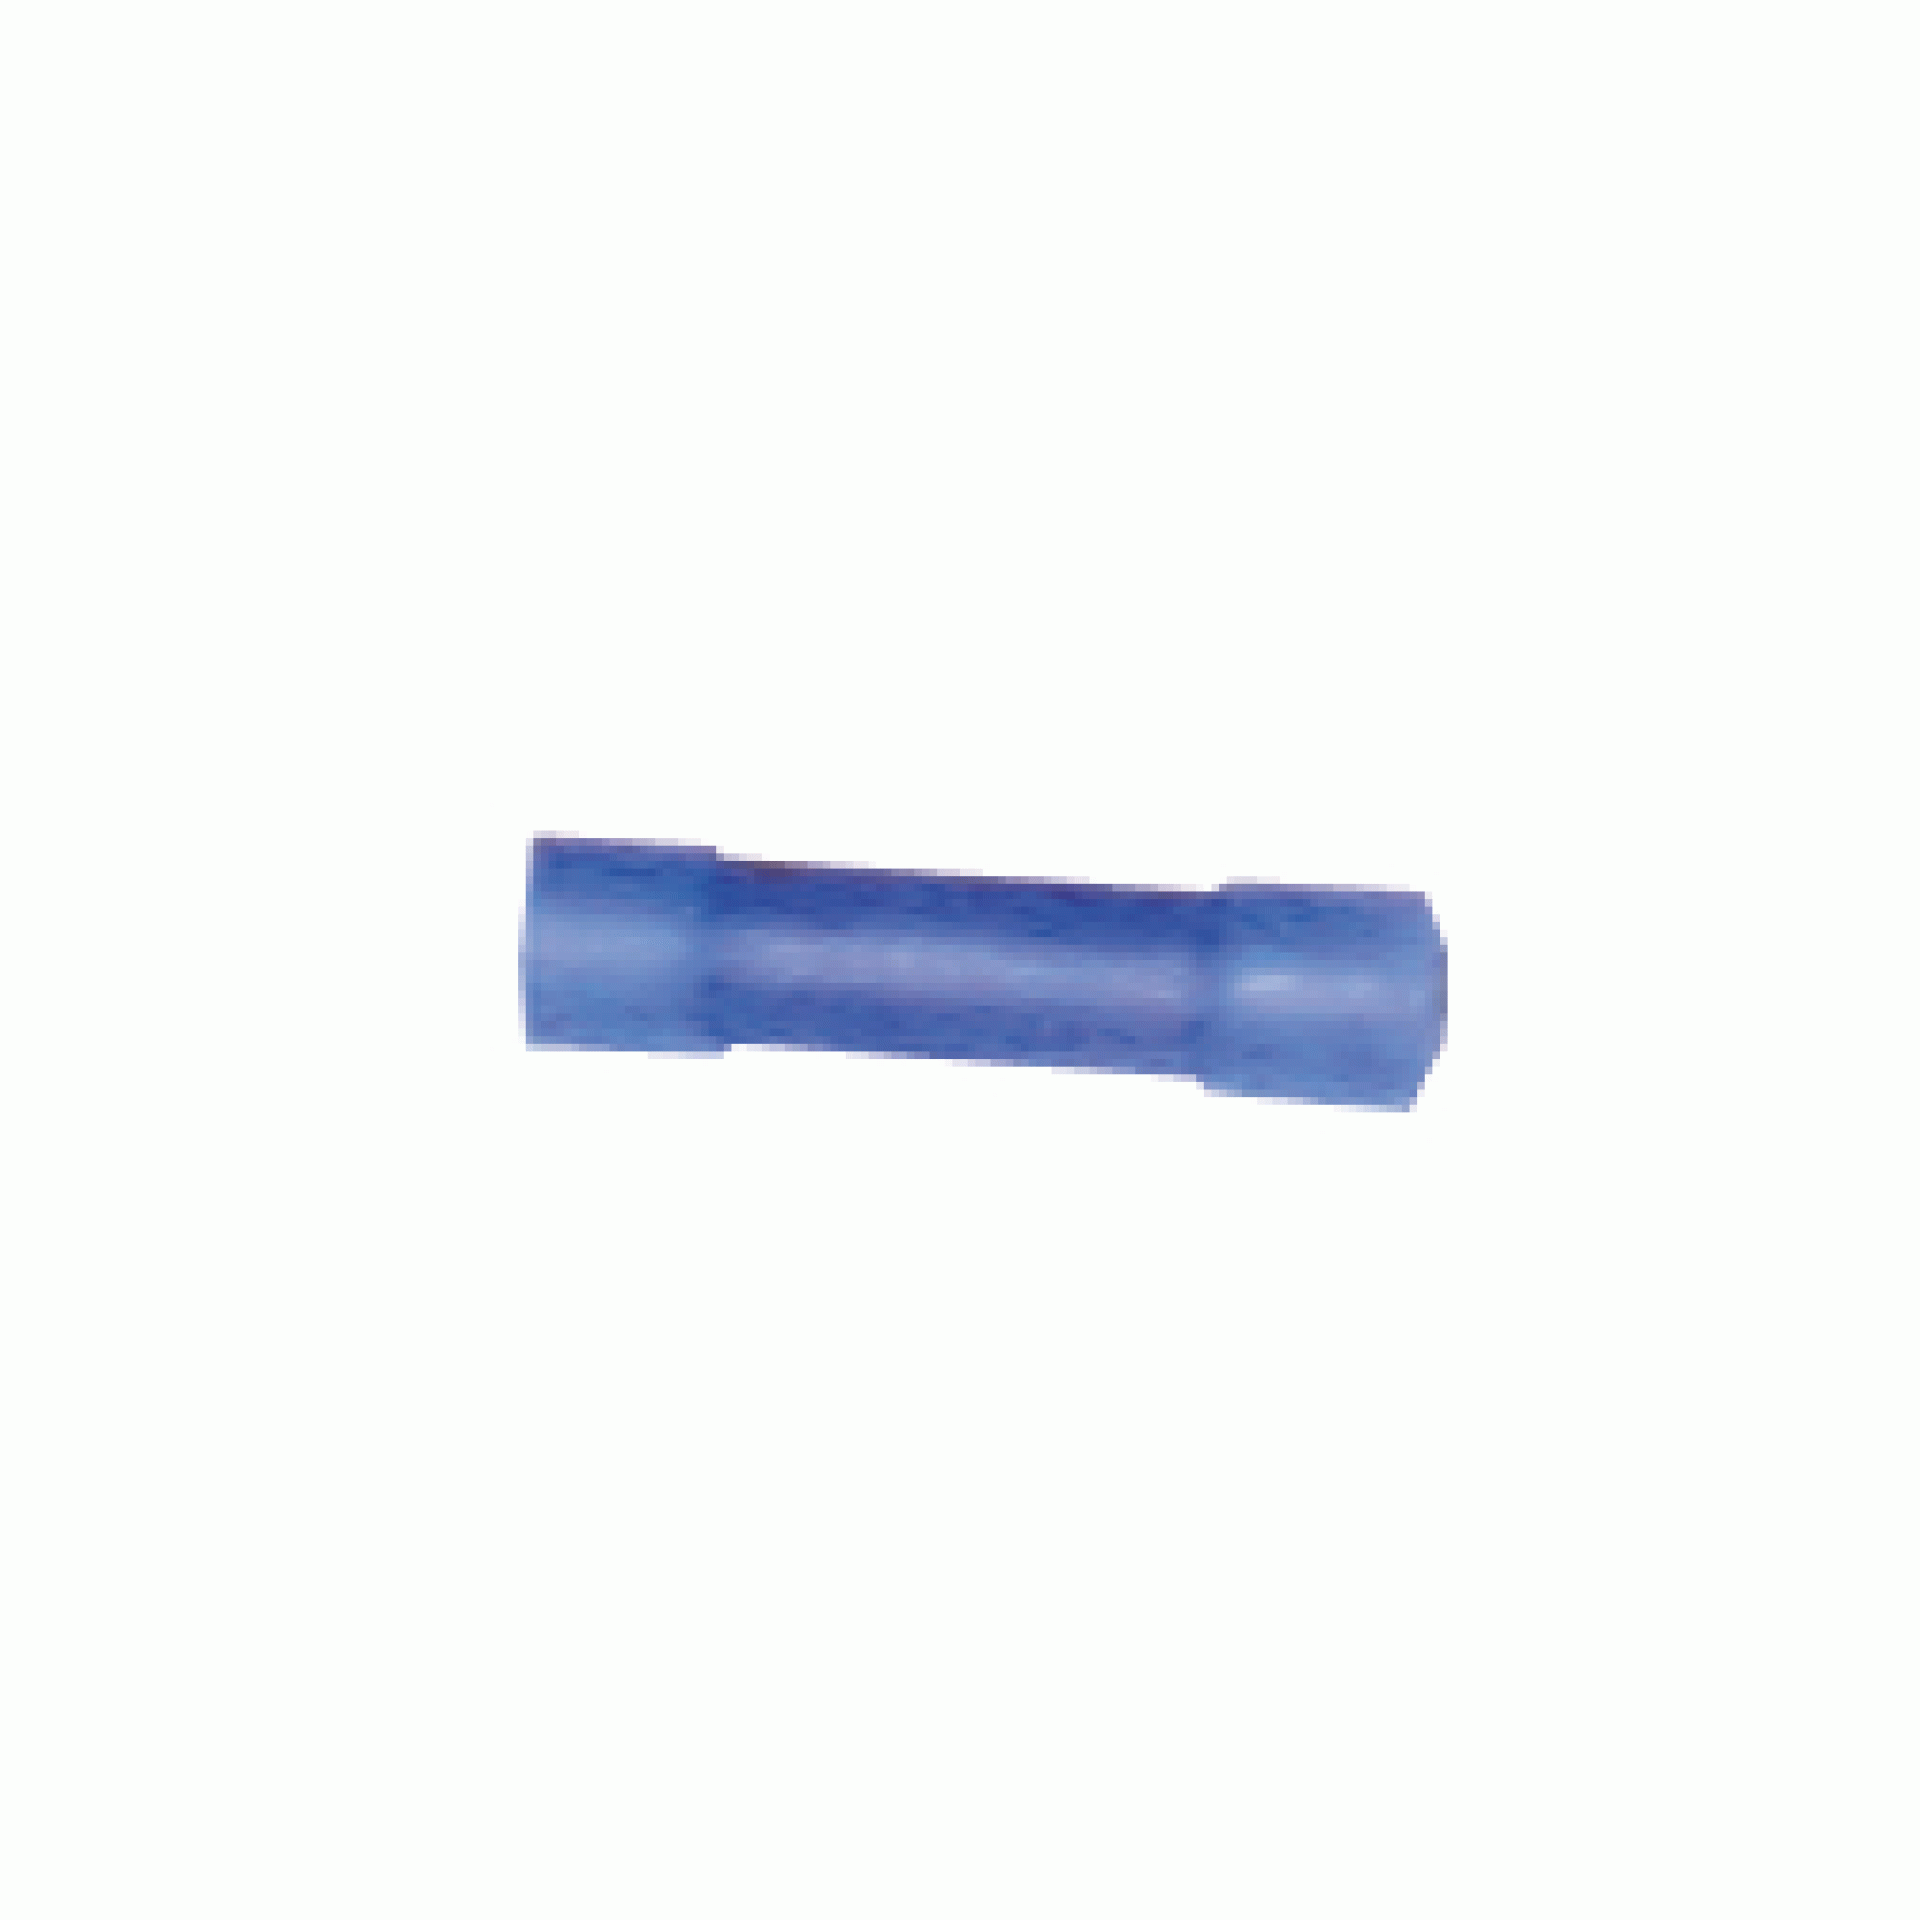 CAMCO MFG INC | 63486 | BUTT CONNECTOR - 16/14 GAUGE - BLUE